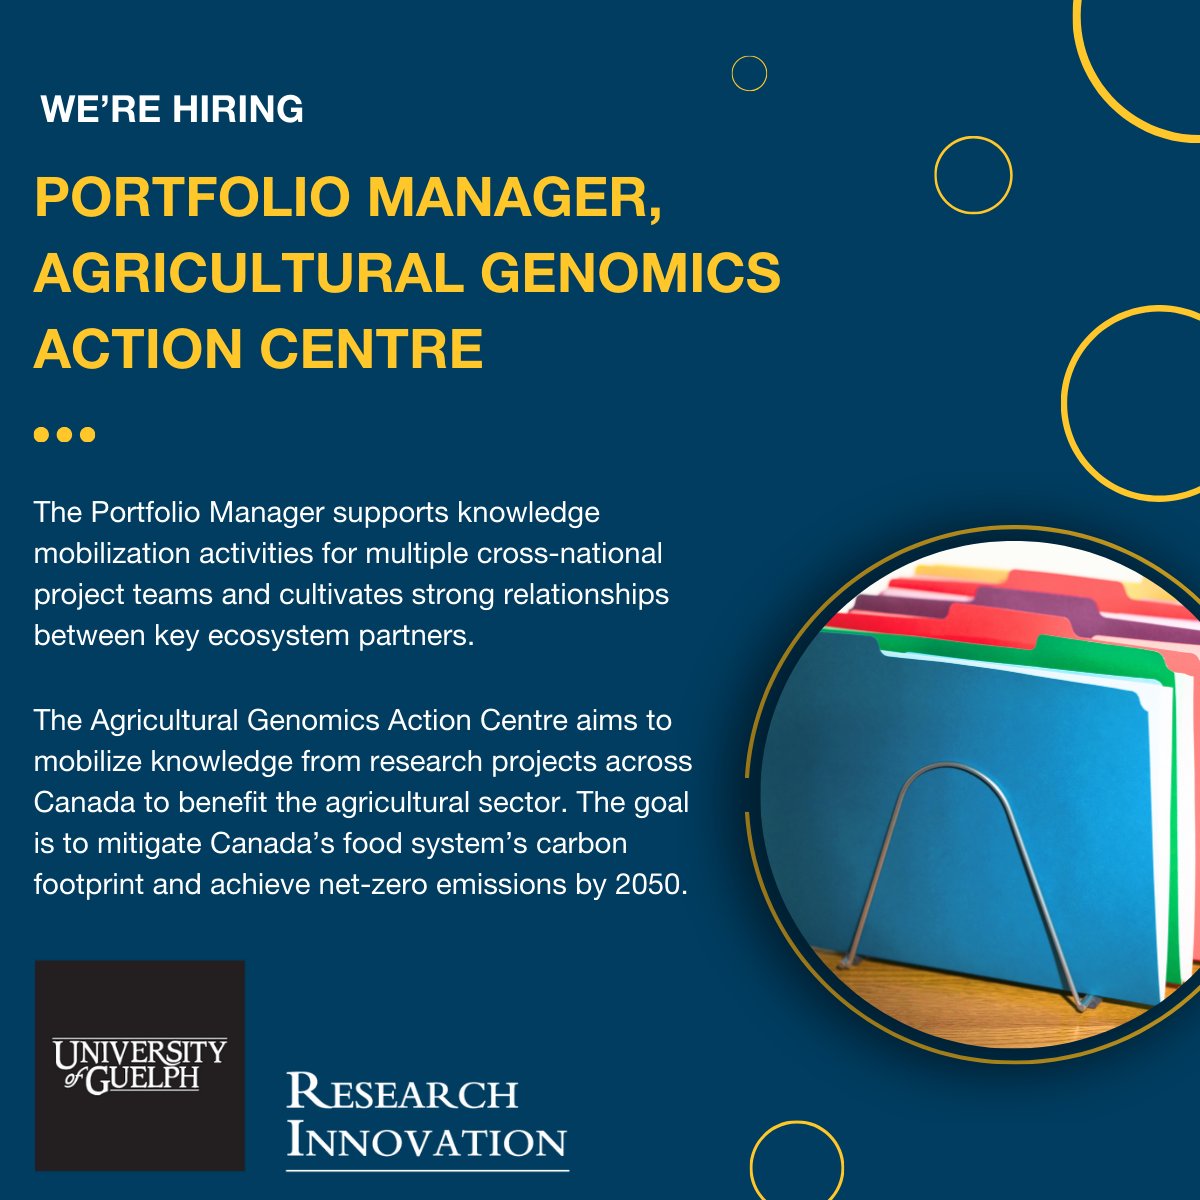 We're hiring! The Portfolio Manager oversees a cross-national agricultural initiative. They engage with internal and external partners, project leadership and knowledge mobilization leads, and non-academics to synthesize research outcomes. Learn more at uoguelph.ca/hr/careers-gue…